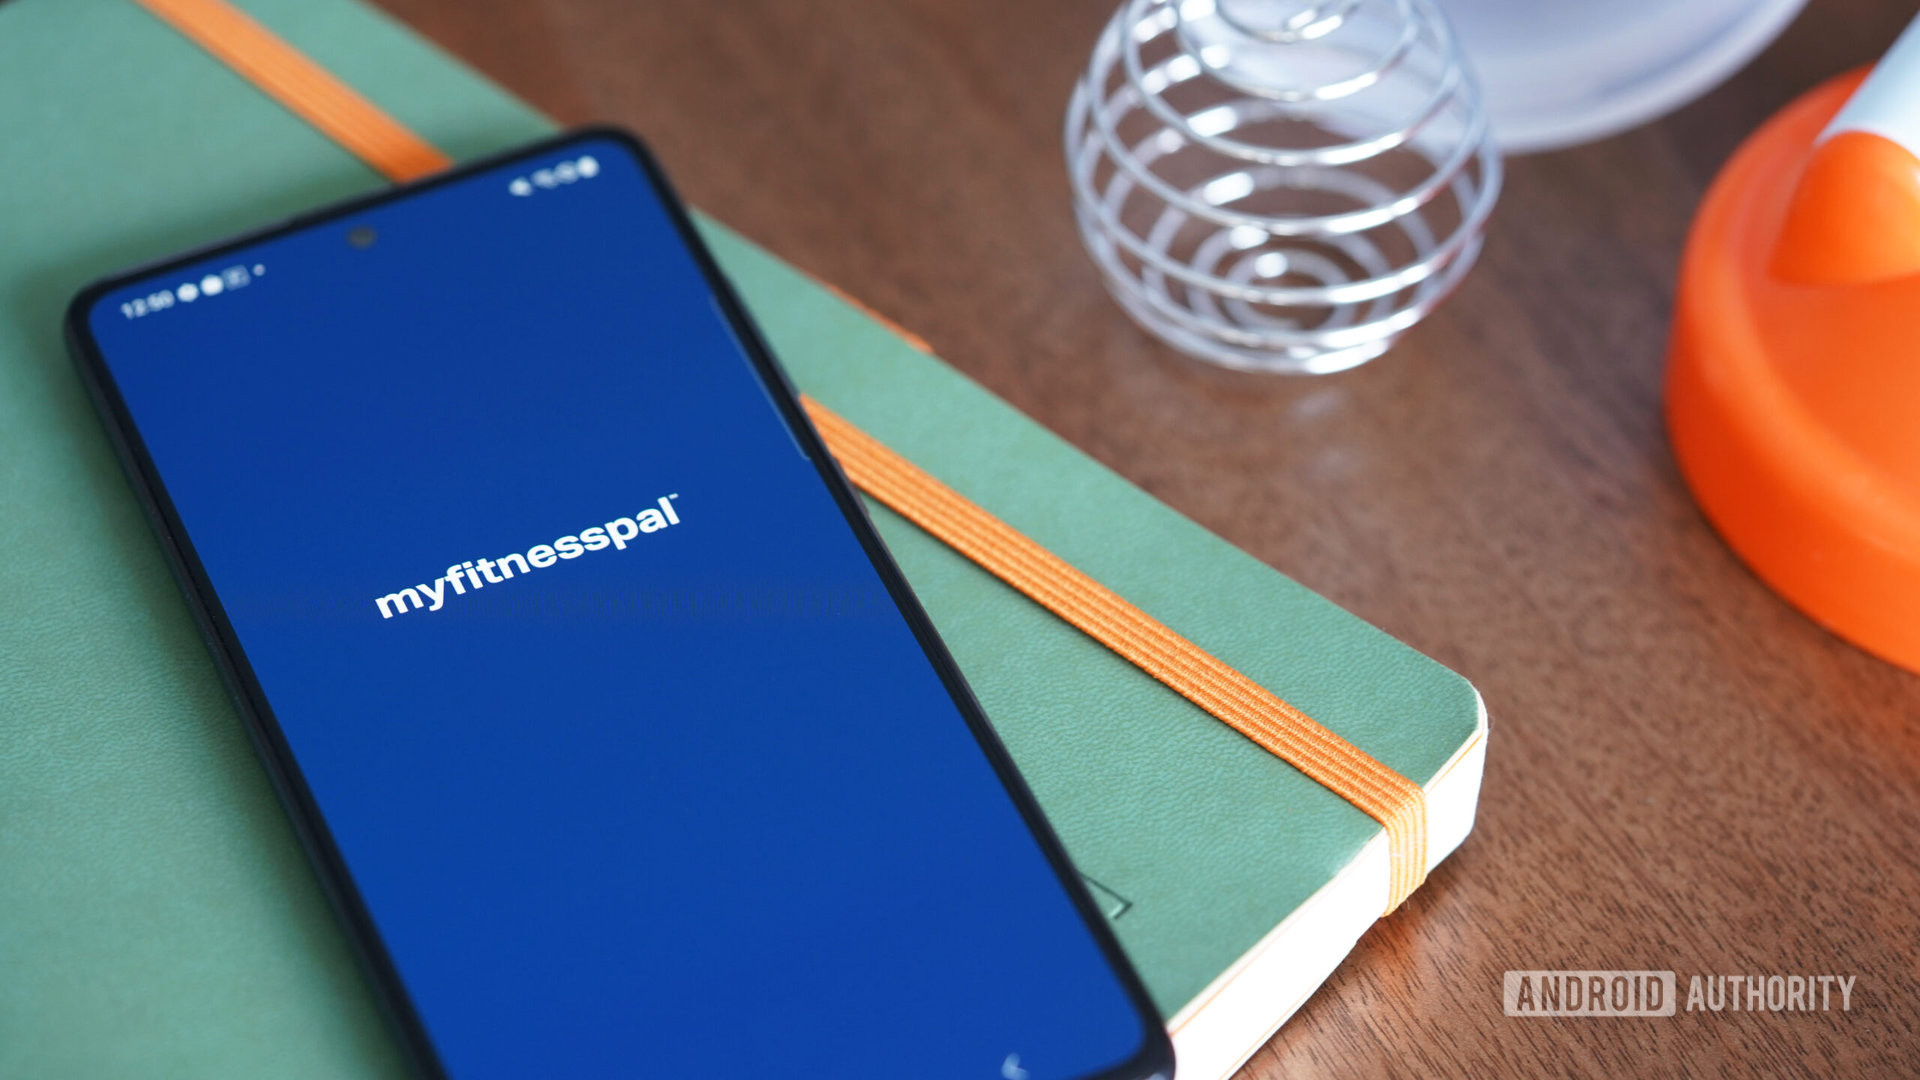 A Samsung Galaxy A51 displays the MyFitnessPal app's opening screen.